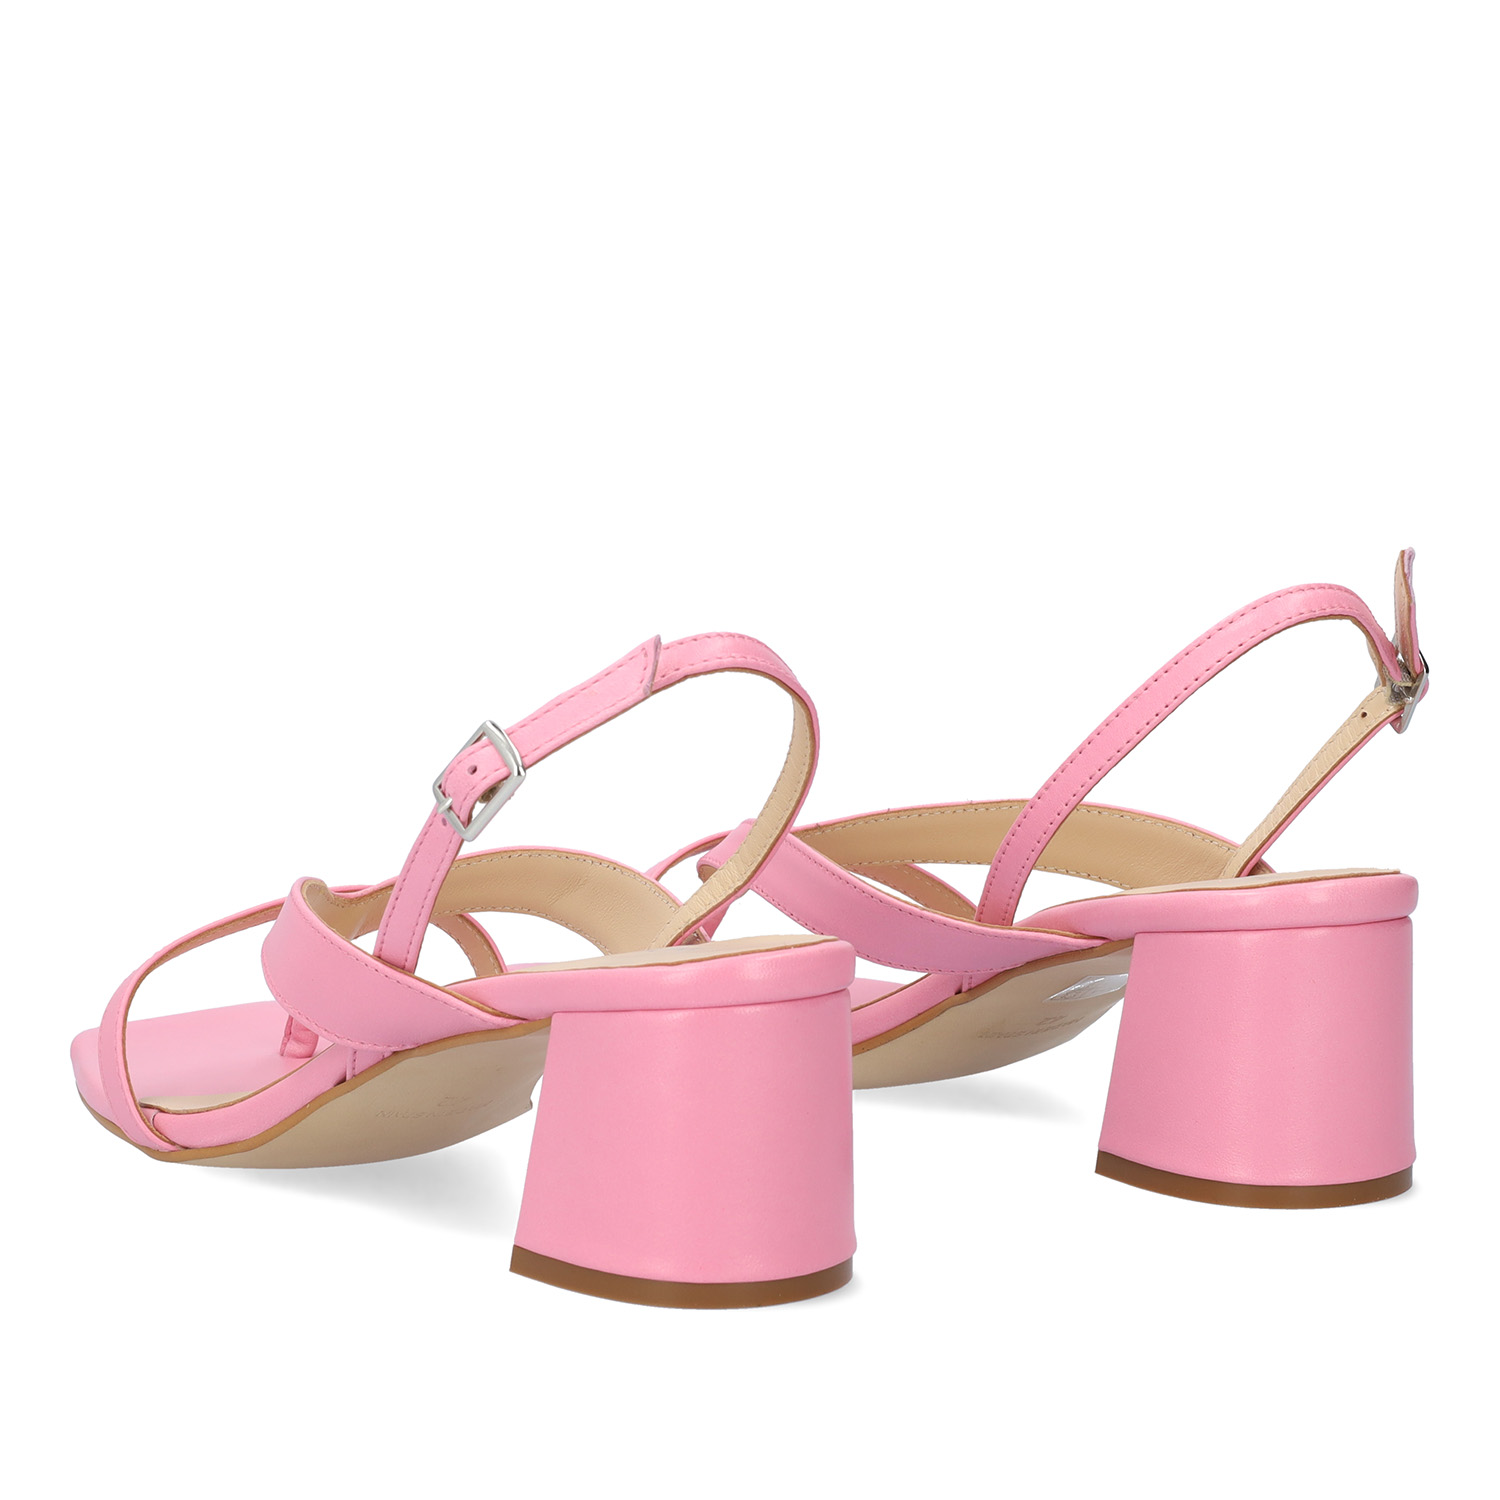 Heeled sandals in pink leather 